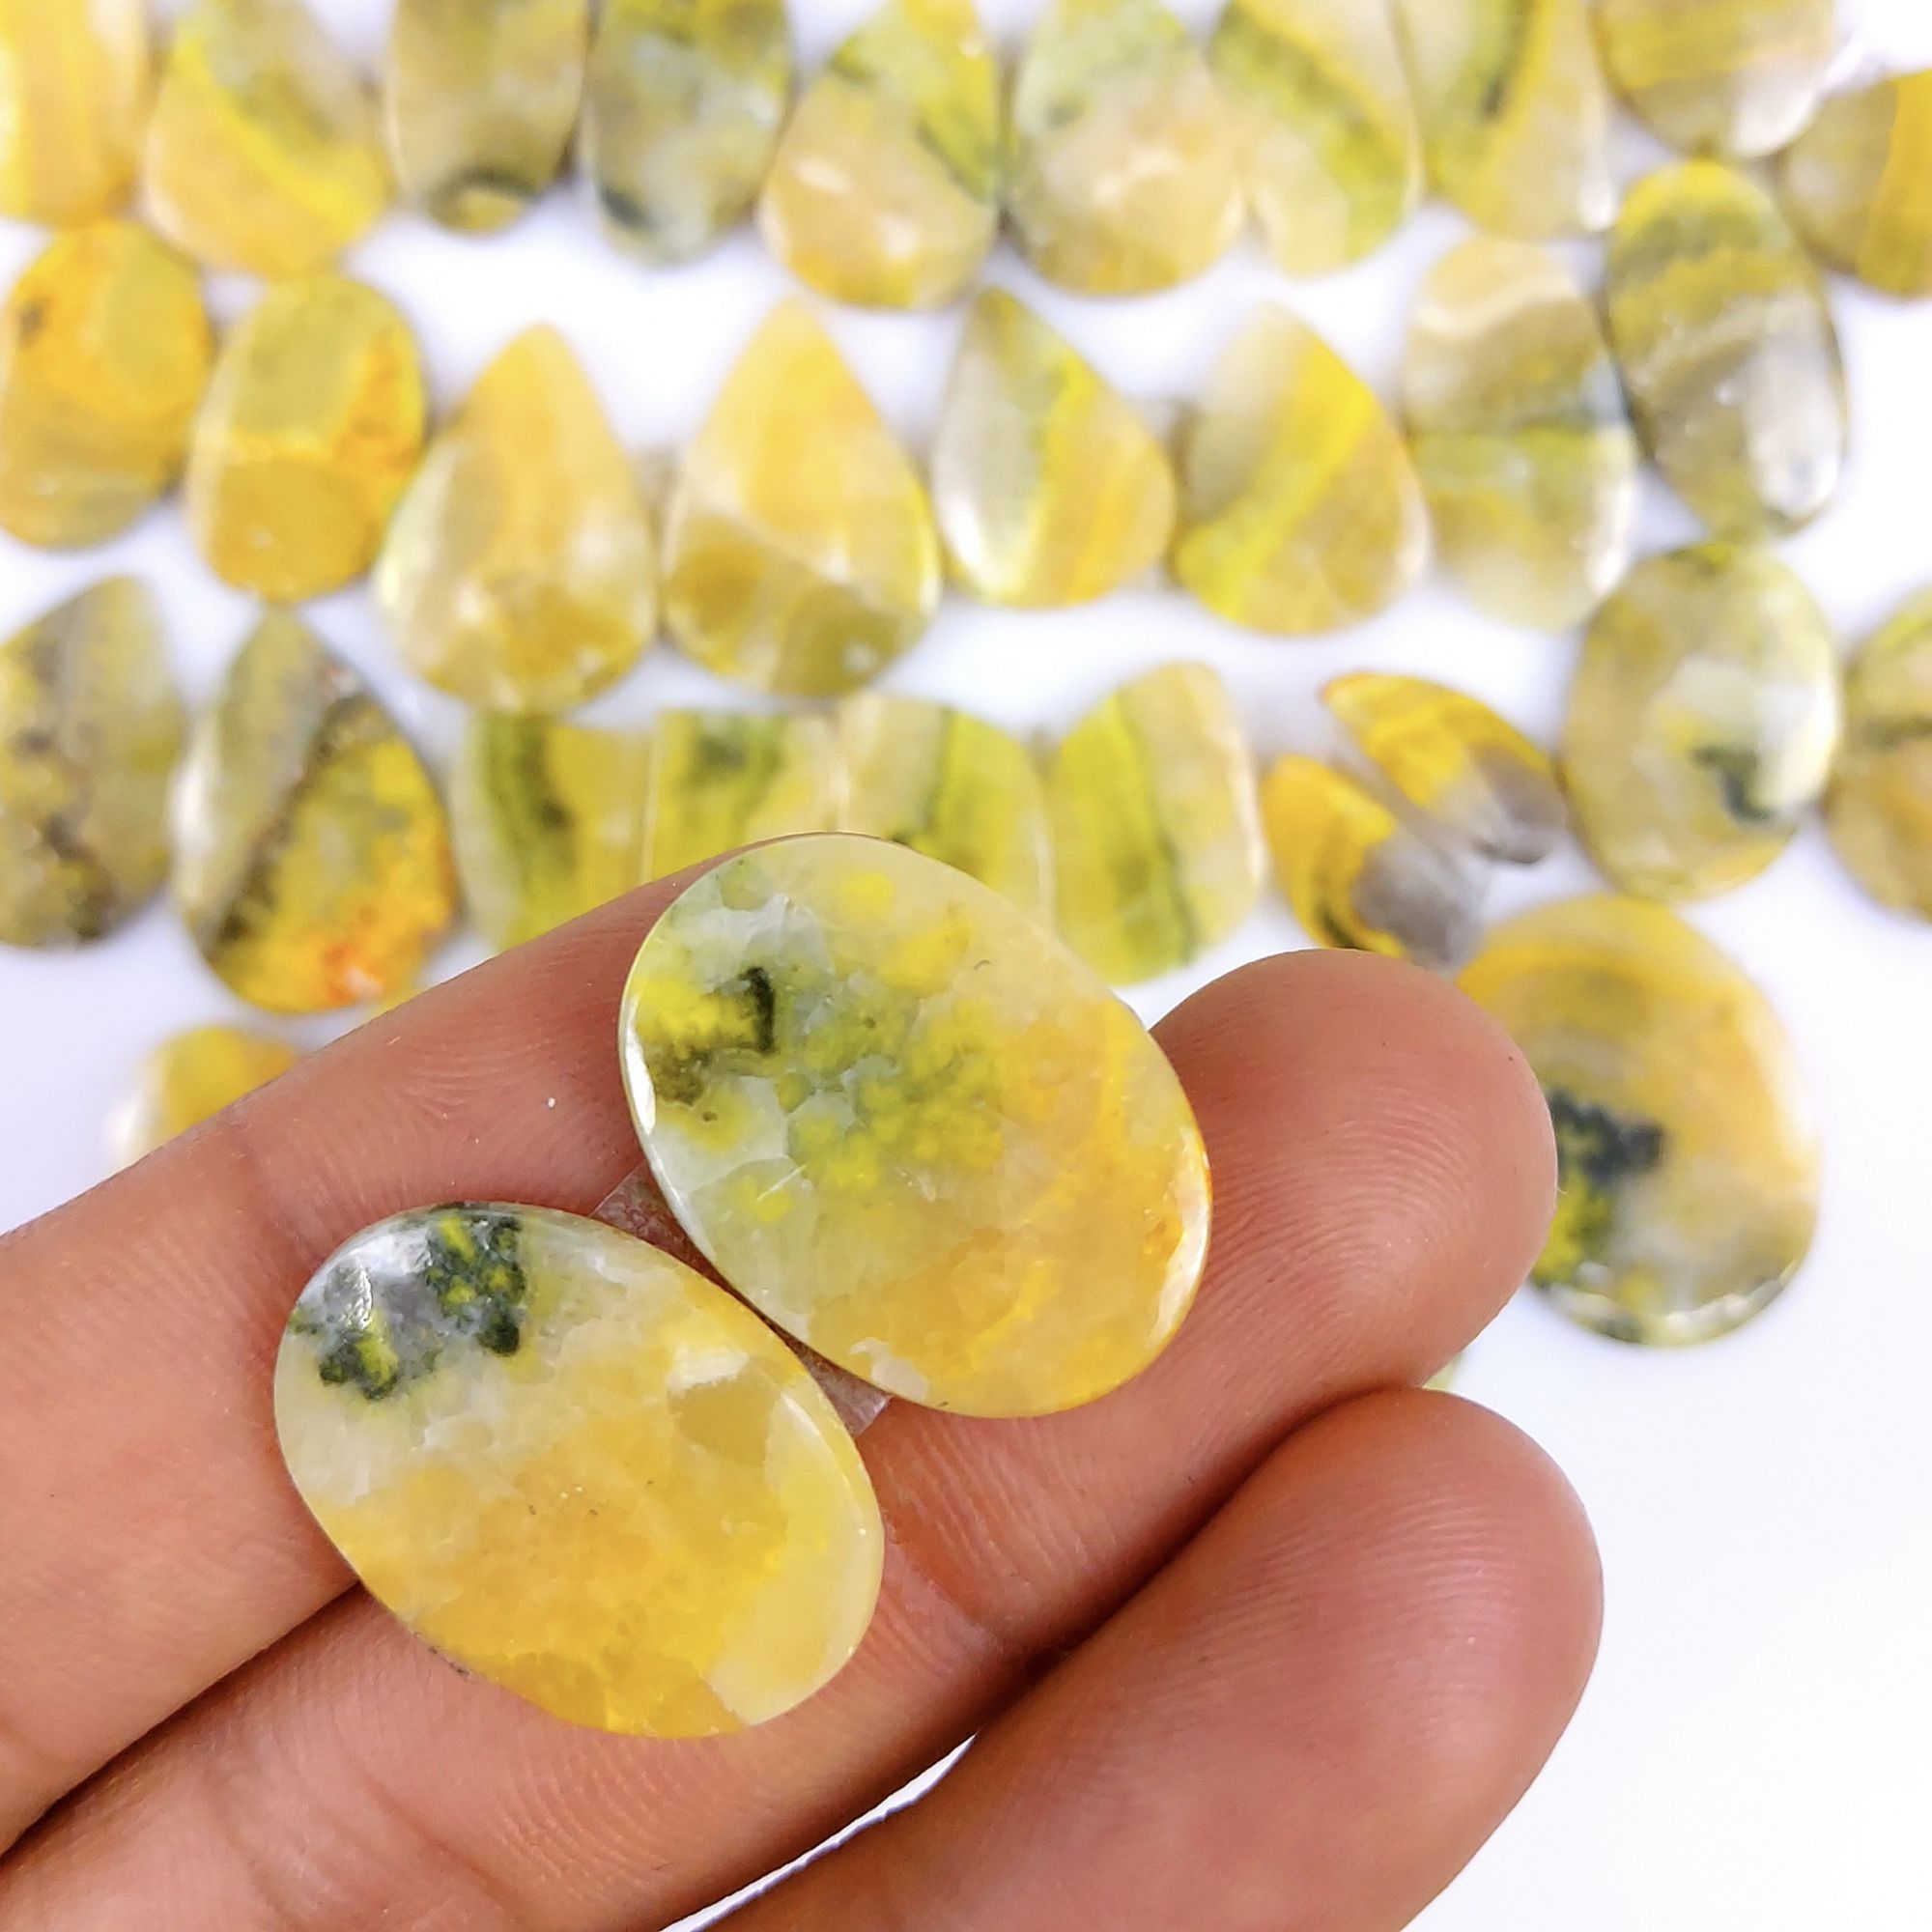 22 Pair Lot 429Cts Natural Bumble Bee Jasper Yellow Sterling Pendant Handmade Jewelry Pendant Natural Gemstone Pendant Gift For Mom 30x20 15x9mm#5682